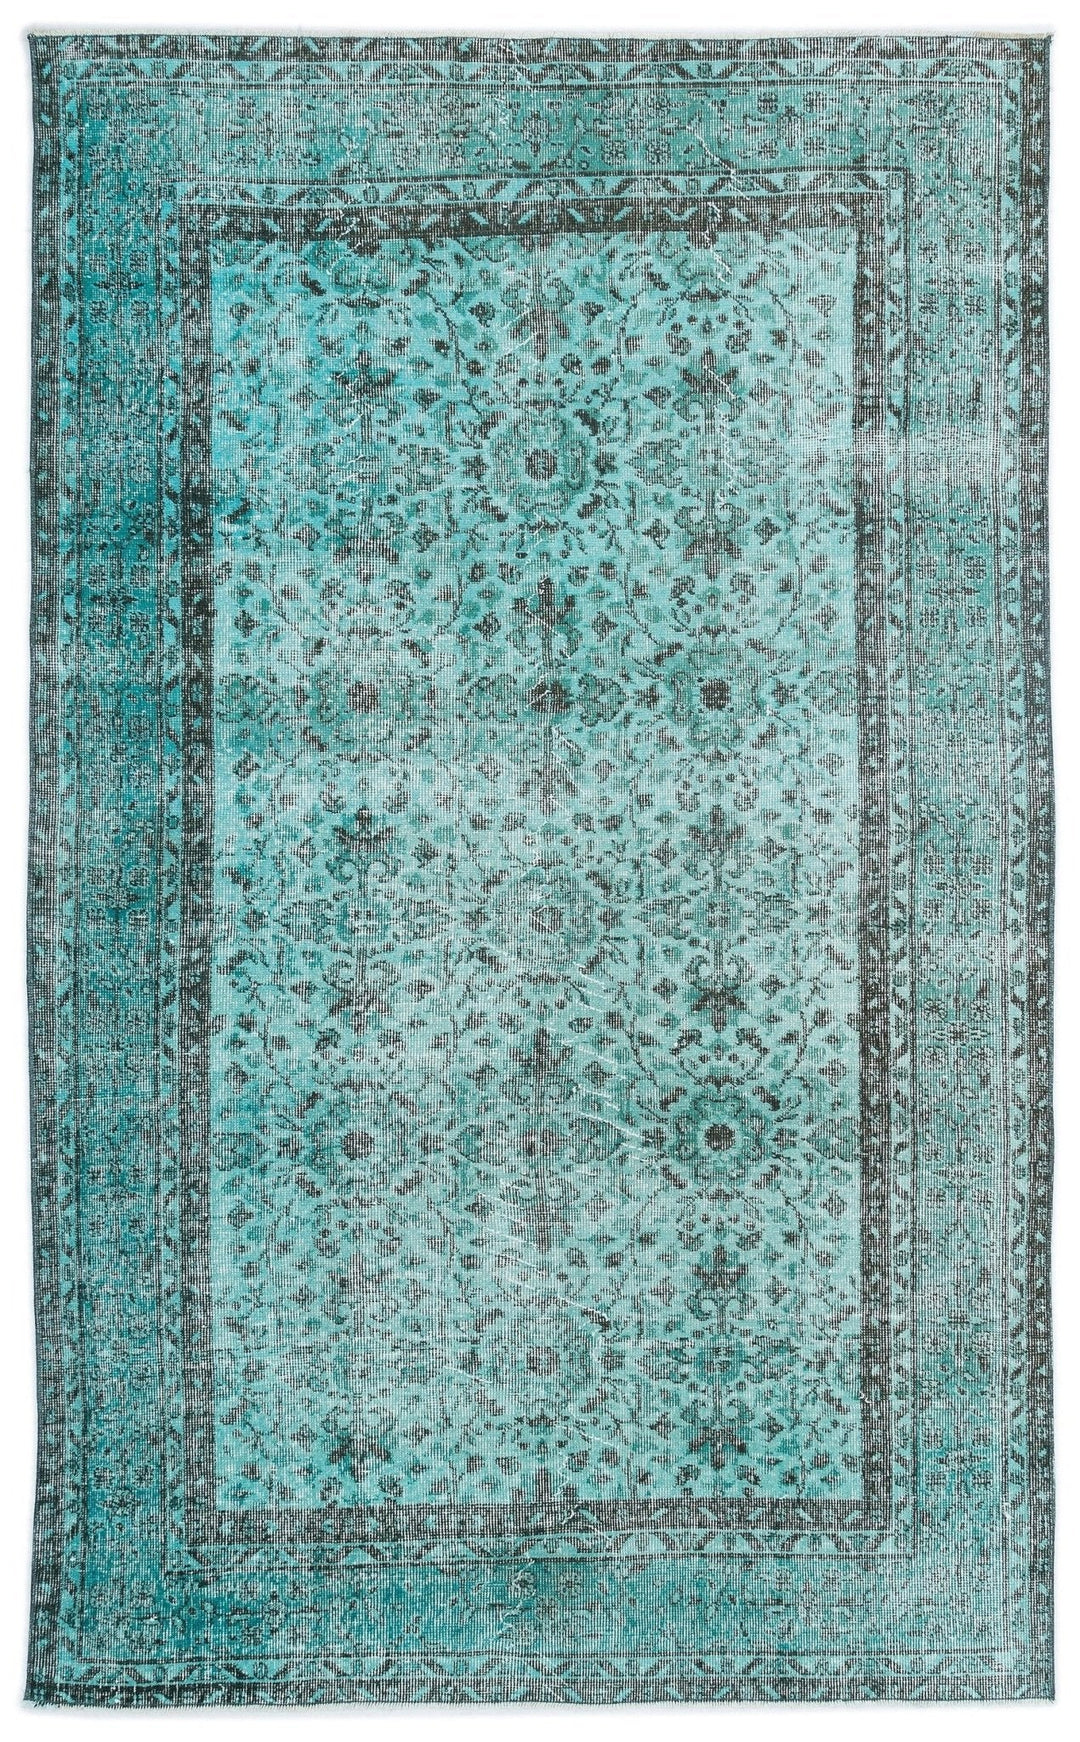 Athens 15944 Turquoise Tumbled Wool Hand Woven Carpet 151 x 251